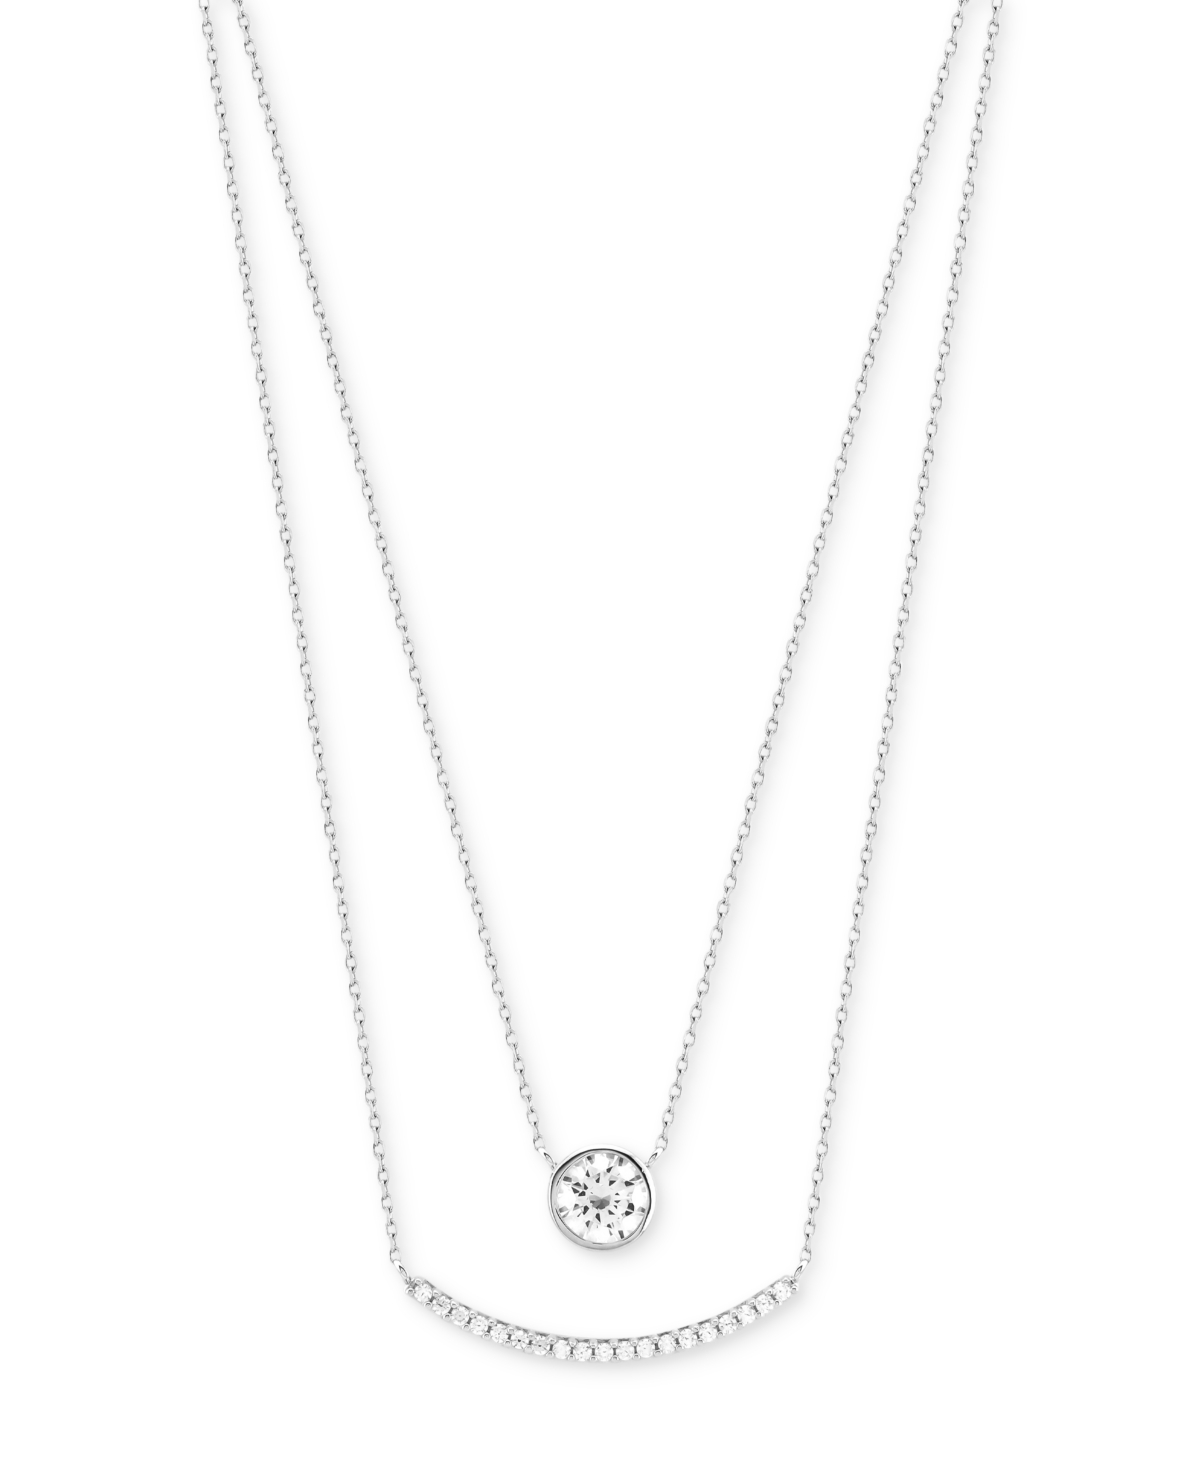 Cubic Zirconia Bezel & Curved Bar Layered Necklace in Sterling Silver, 16" + 2" extender - Sterling Silver